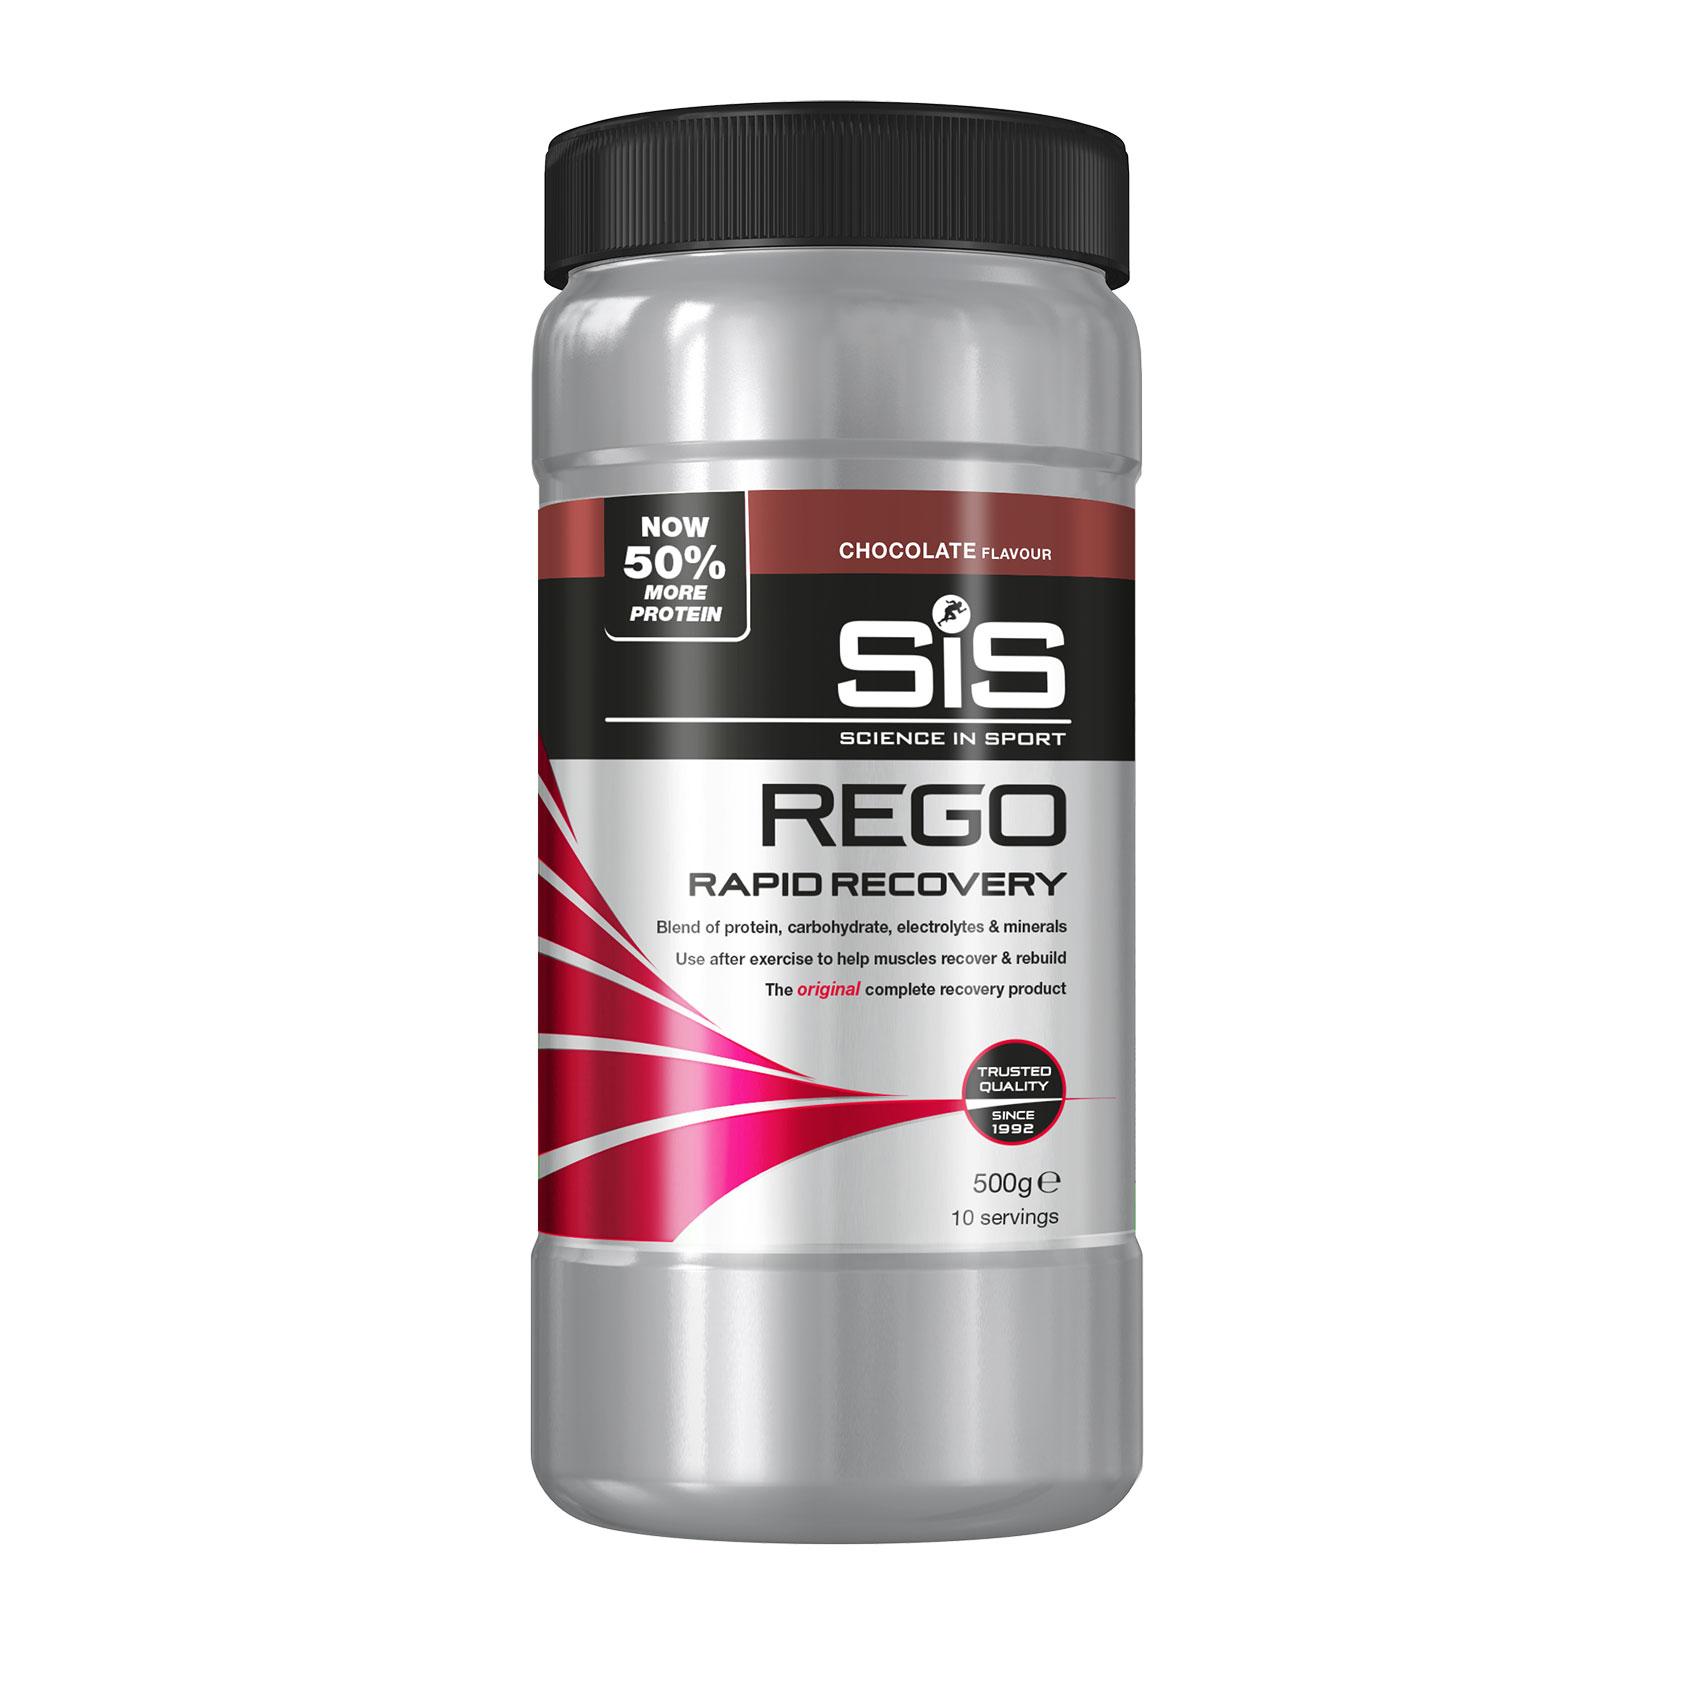 Science In Sport Rego Rapid Recovery 500g